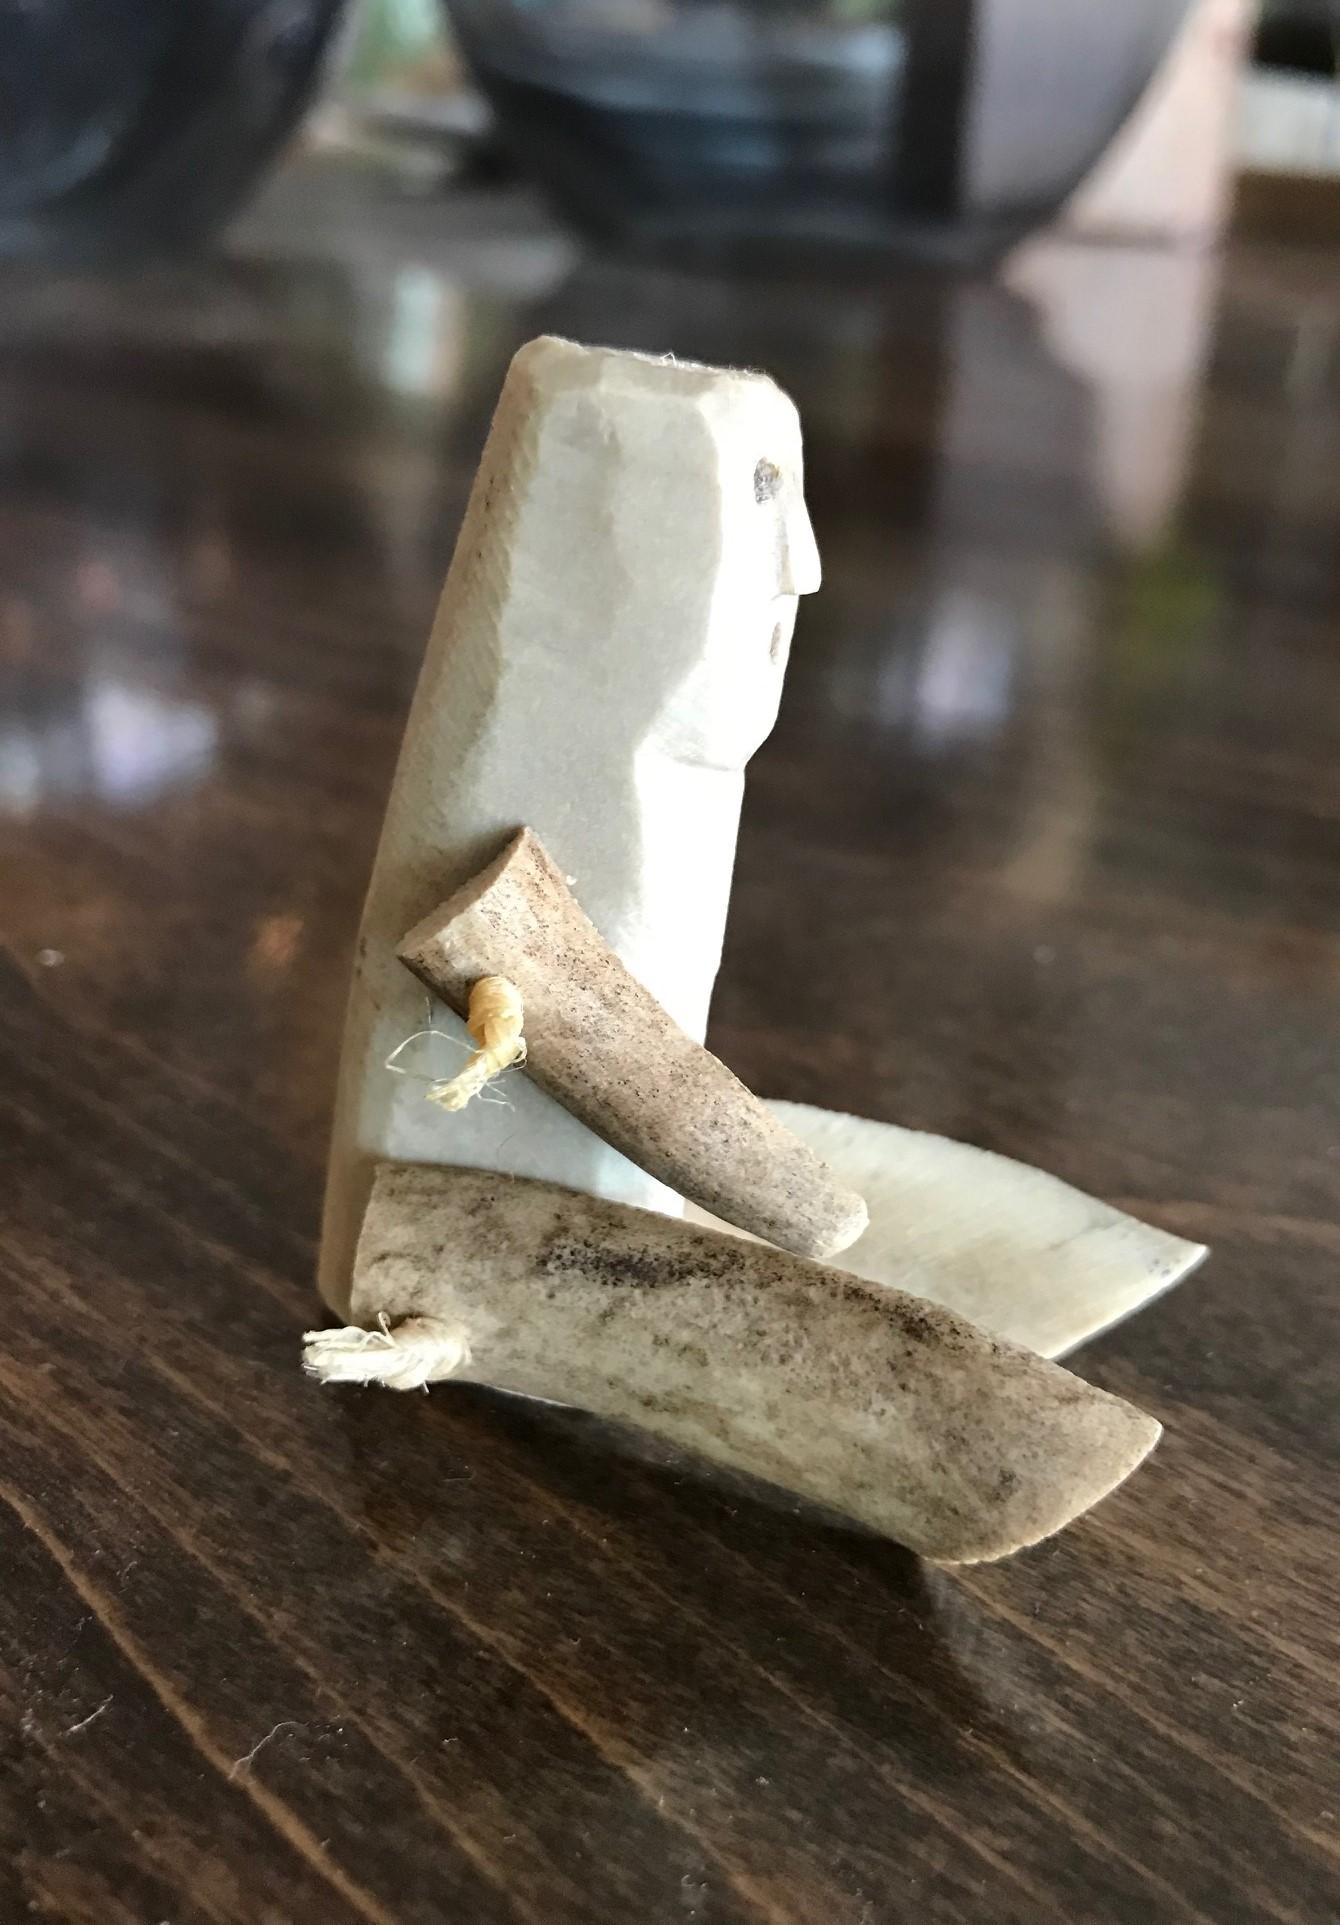 A curious, little hand carved from bone (likely caribou and/or antler) Inuit toy doll with movable hands and legs. These were often kept as tokens for good luck. 

Very similar examples can be seen in the Children's Museum in London and the